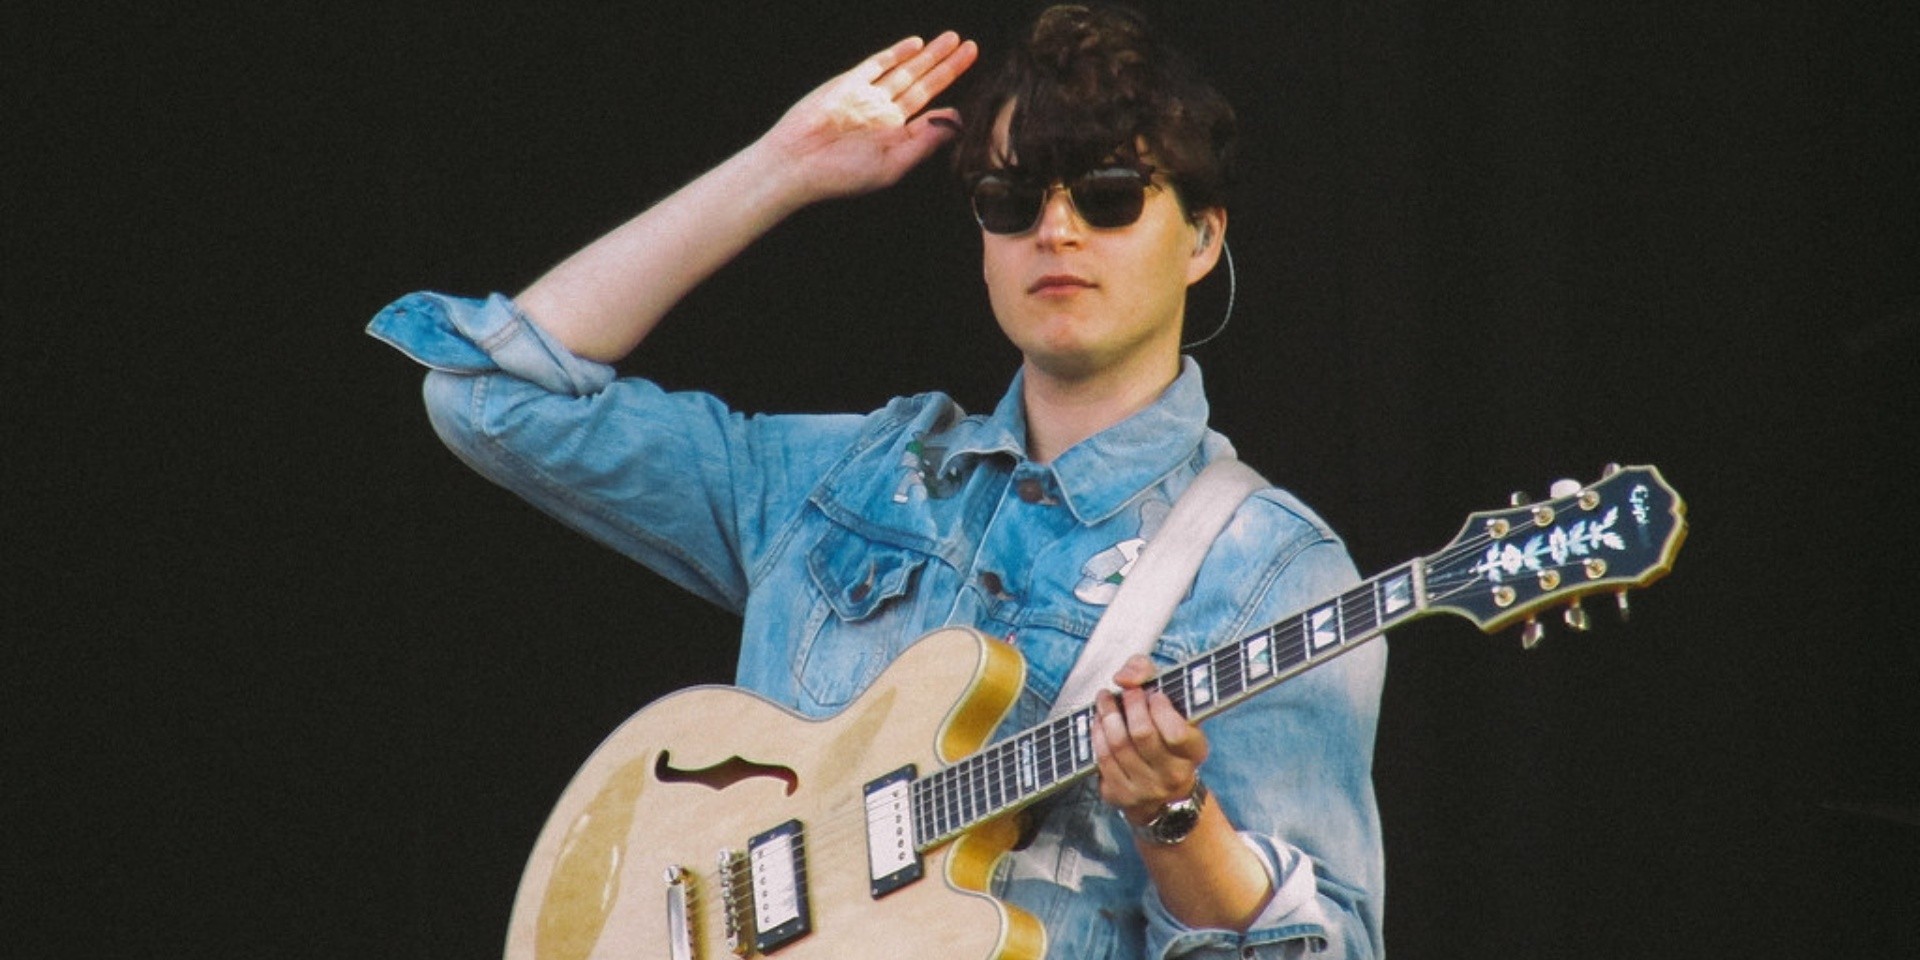 Vampire Weekend takes a trip through California in new music video for 'This Life' – watch